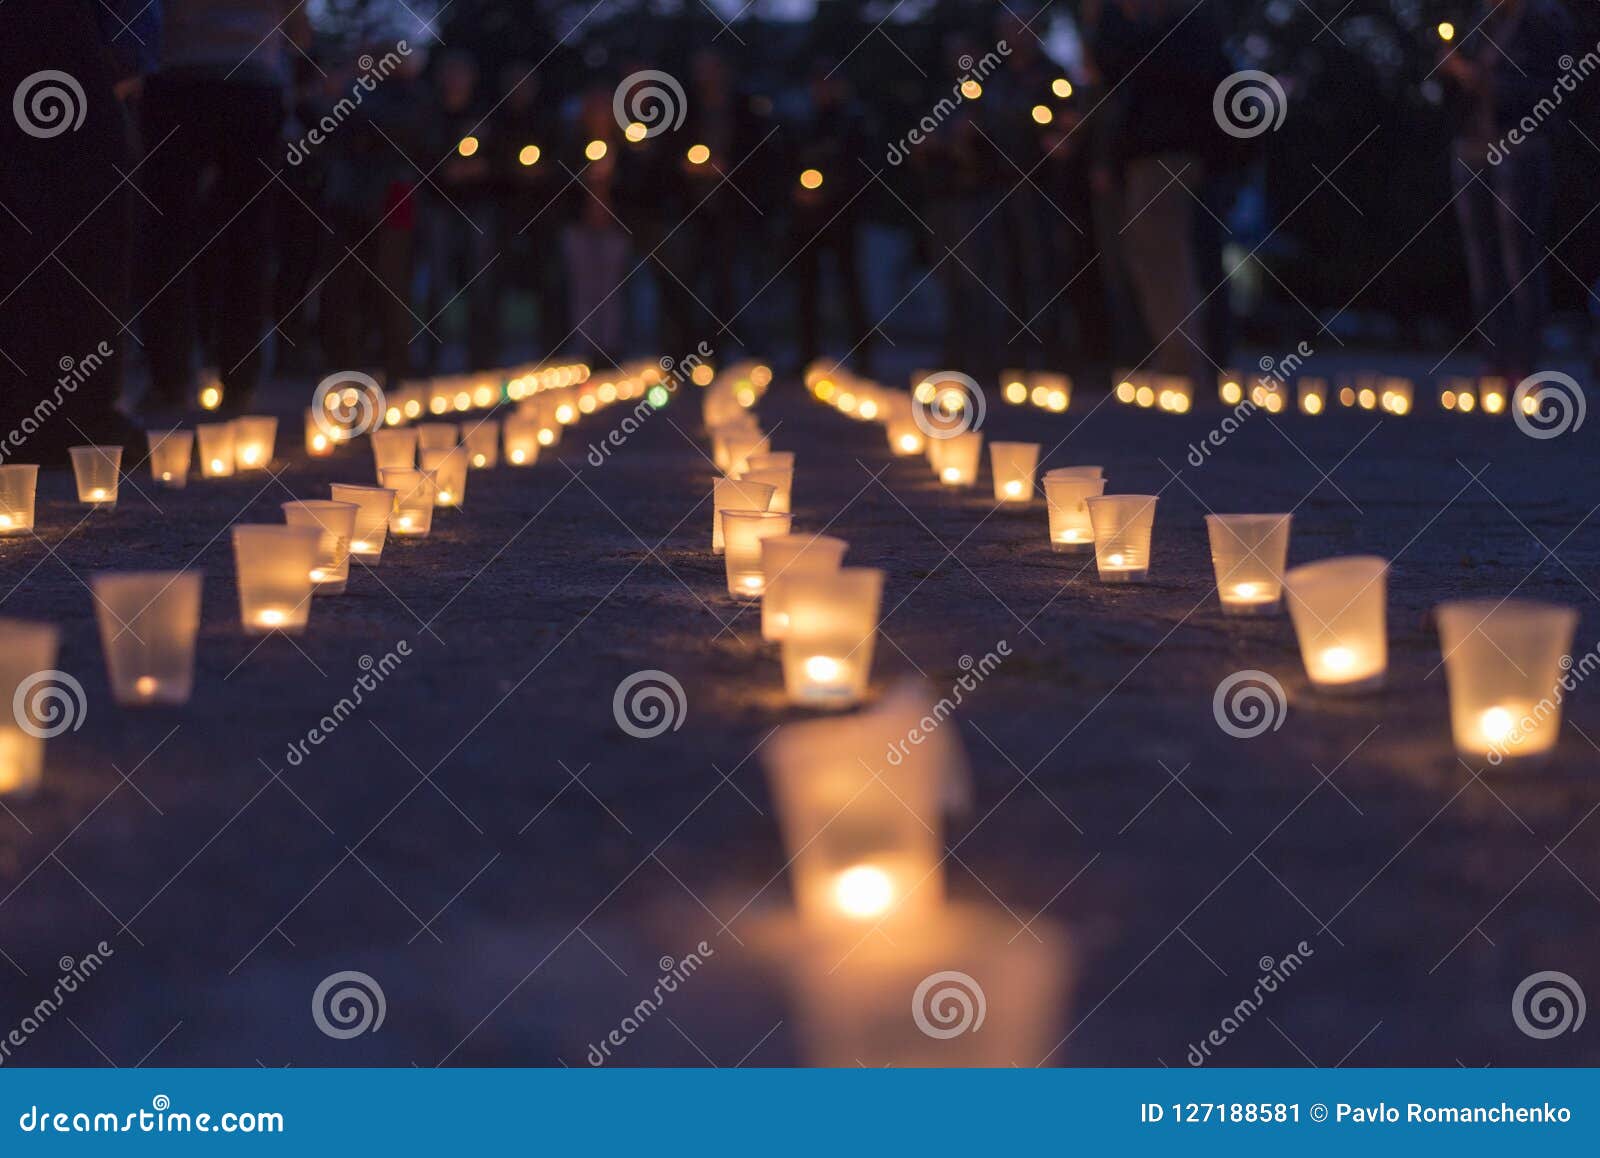 a group of candles burning in street and people holding candles in the background. day of memory of the bereaved